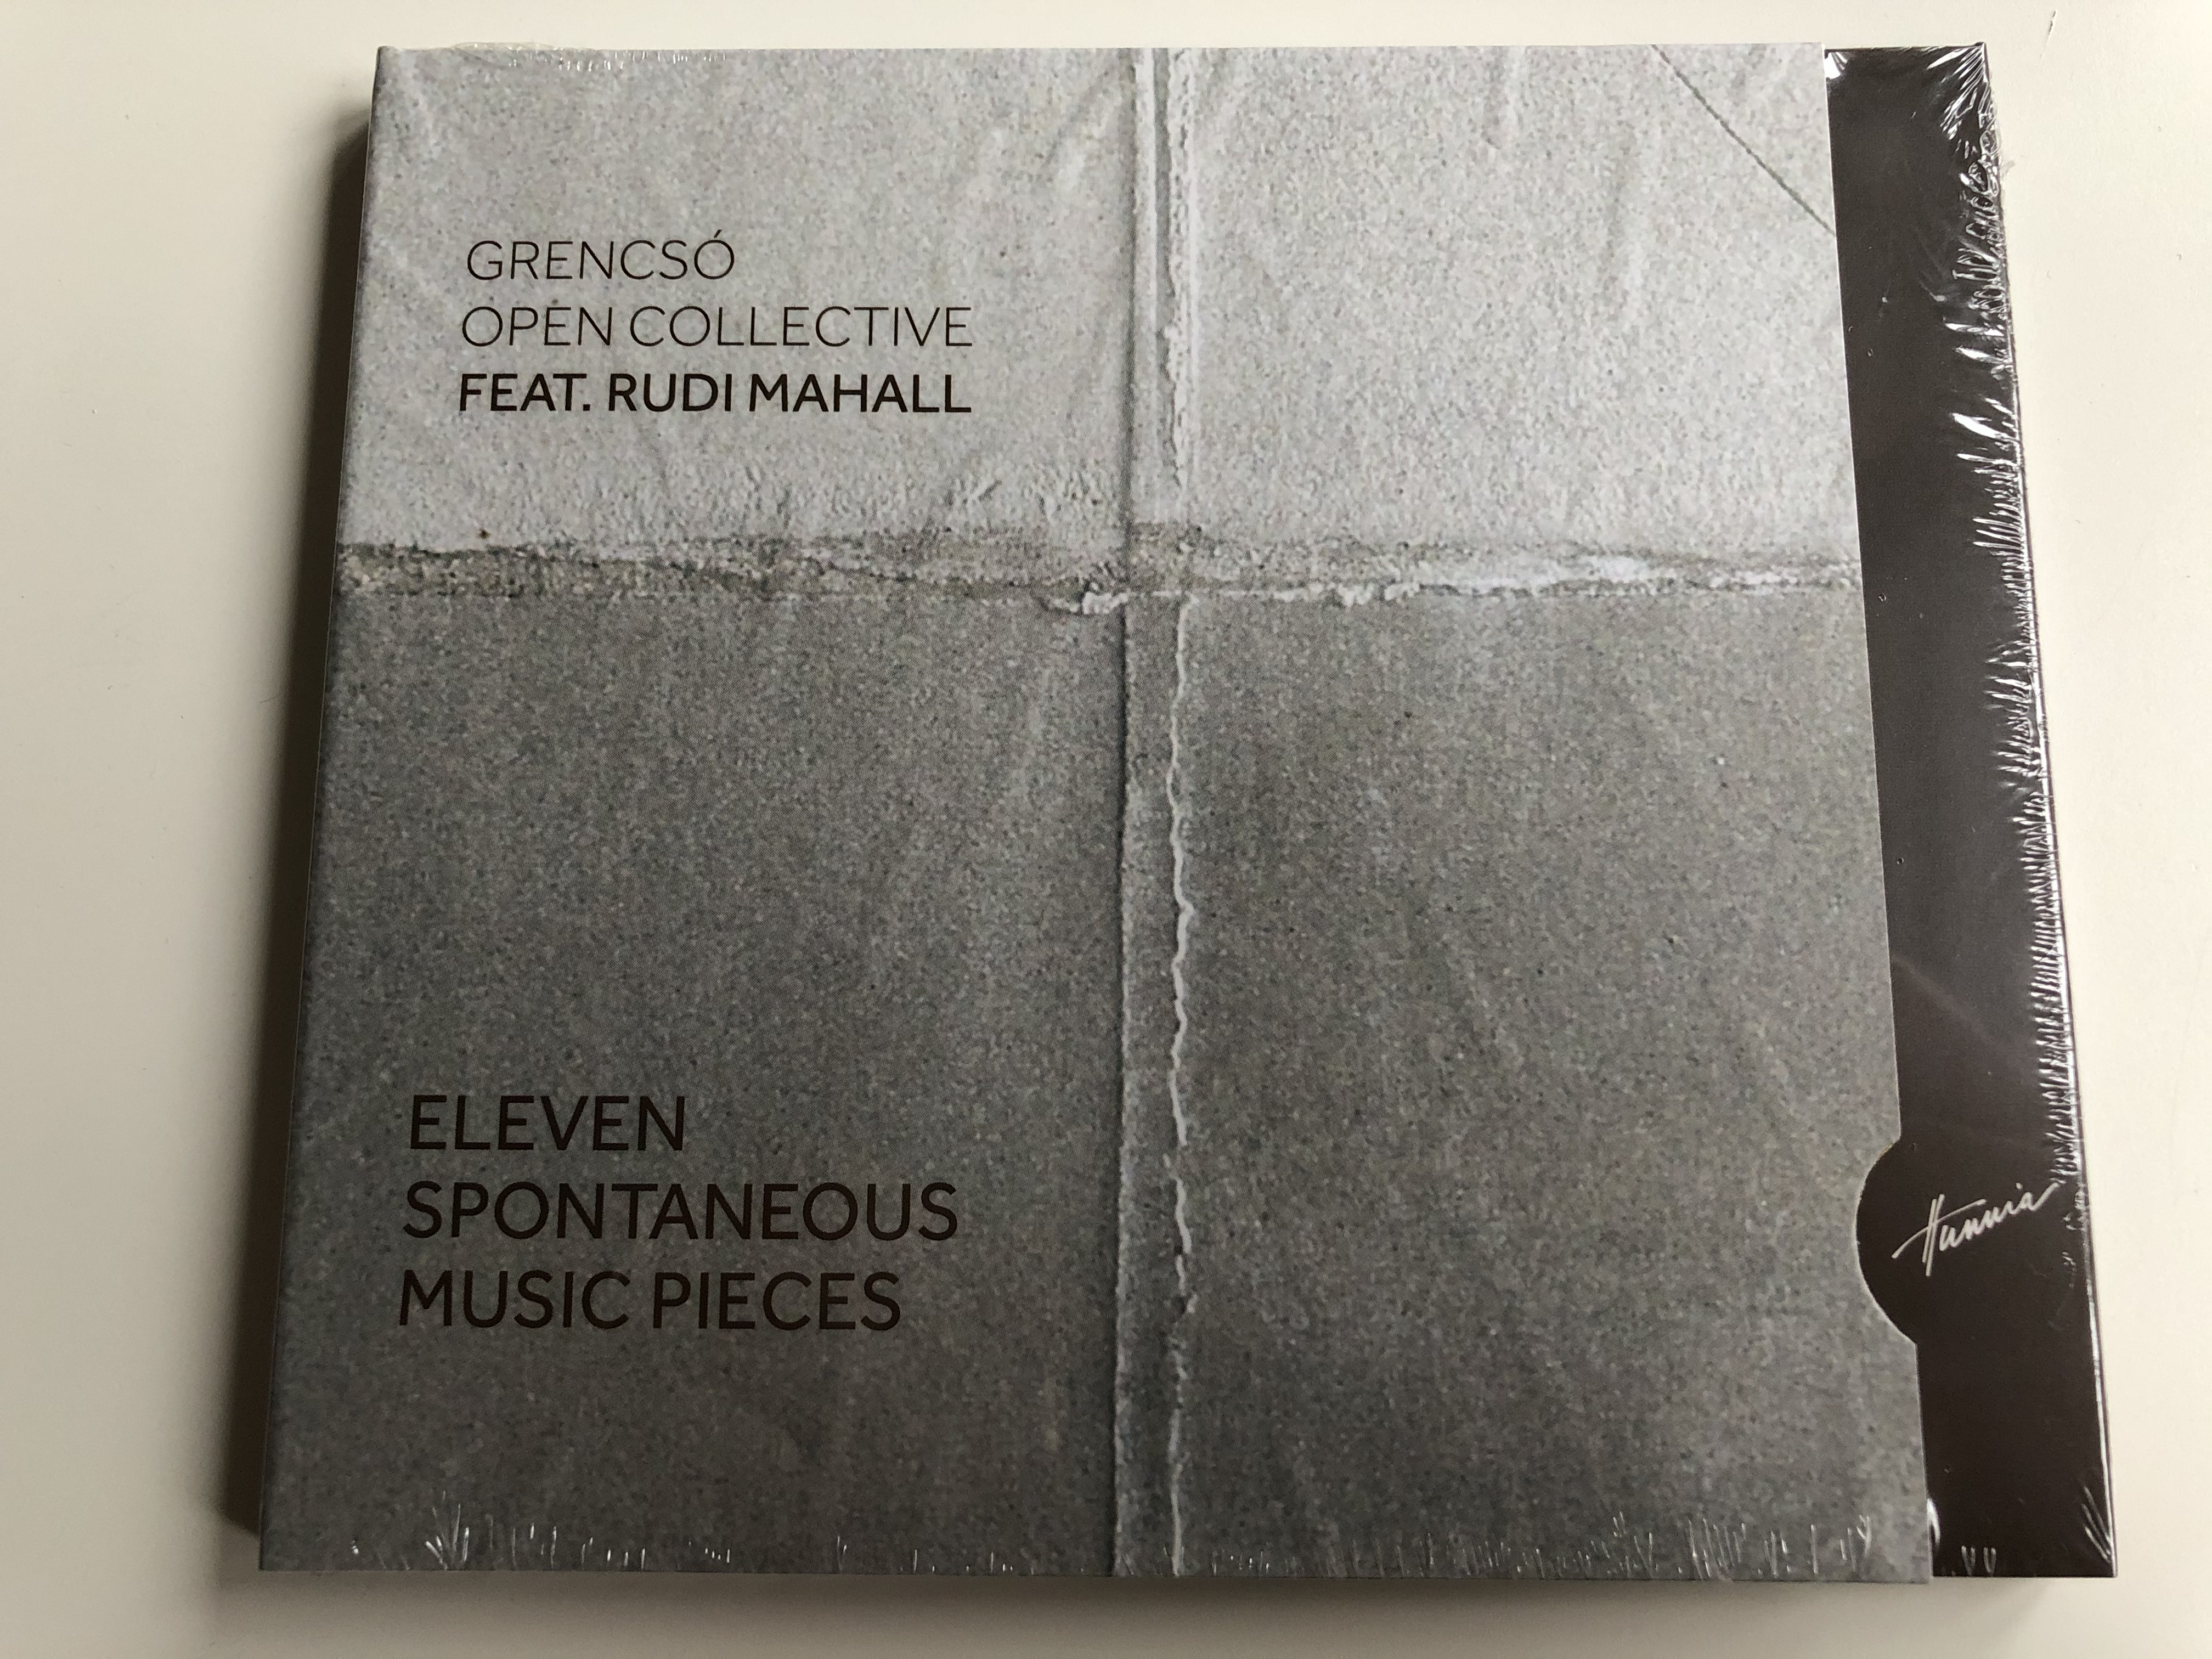 grencs-open-collective-feat.-rudi-mahall-eleven-spontaneous-music-pieces-hunnia-records-film-production-audio-cd-2014-hrcd-1403-1-.jpg